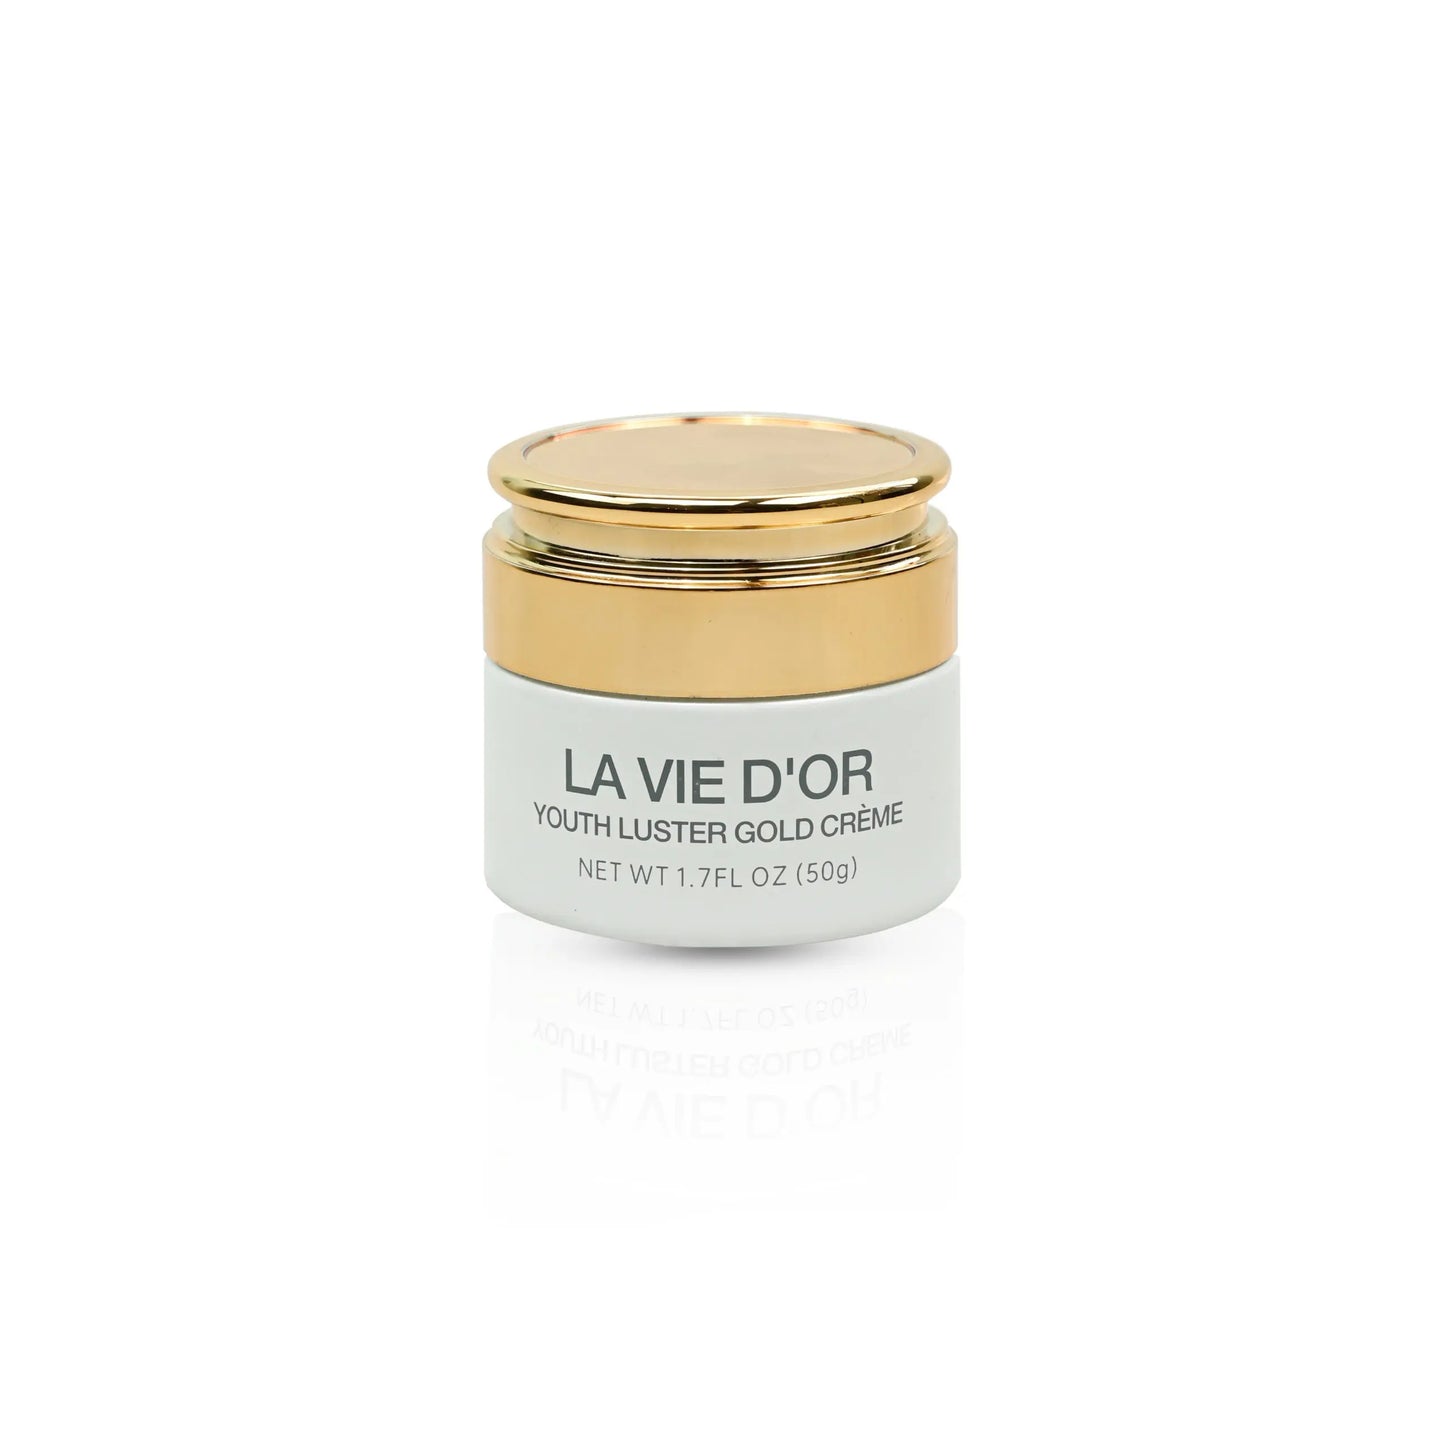 LA VIE D’OR Youth Luster Gold Creme